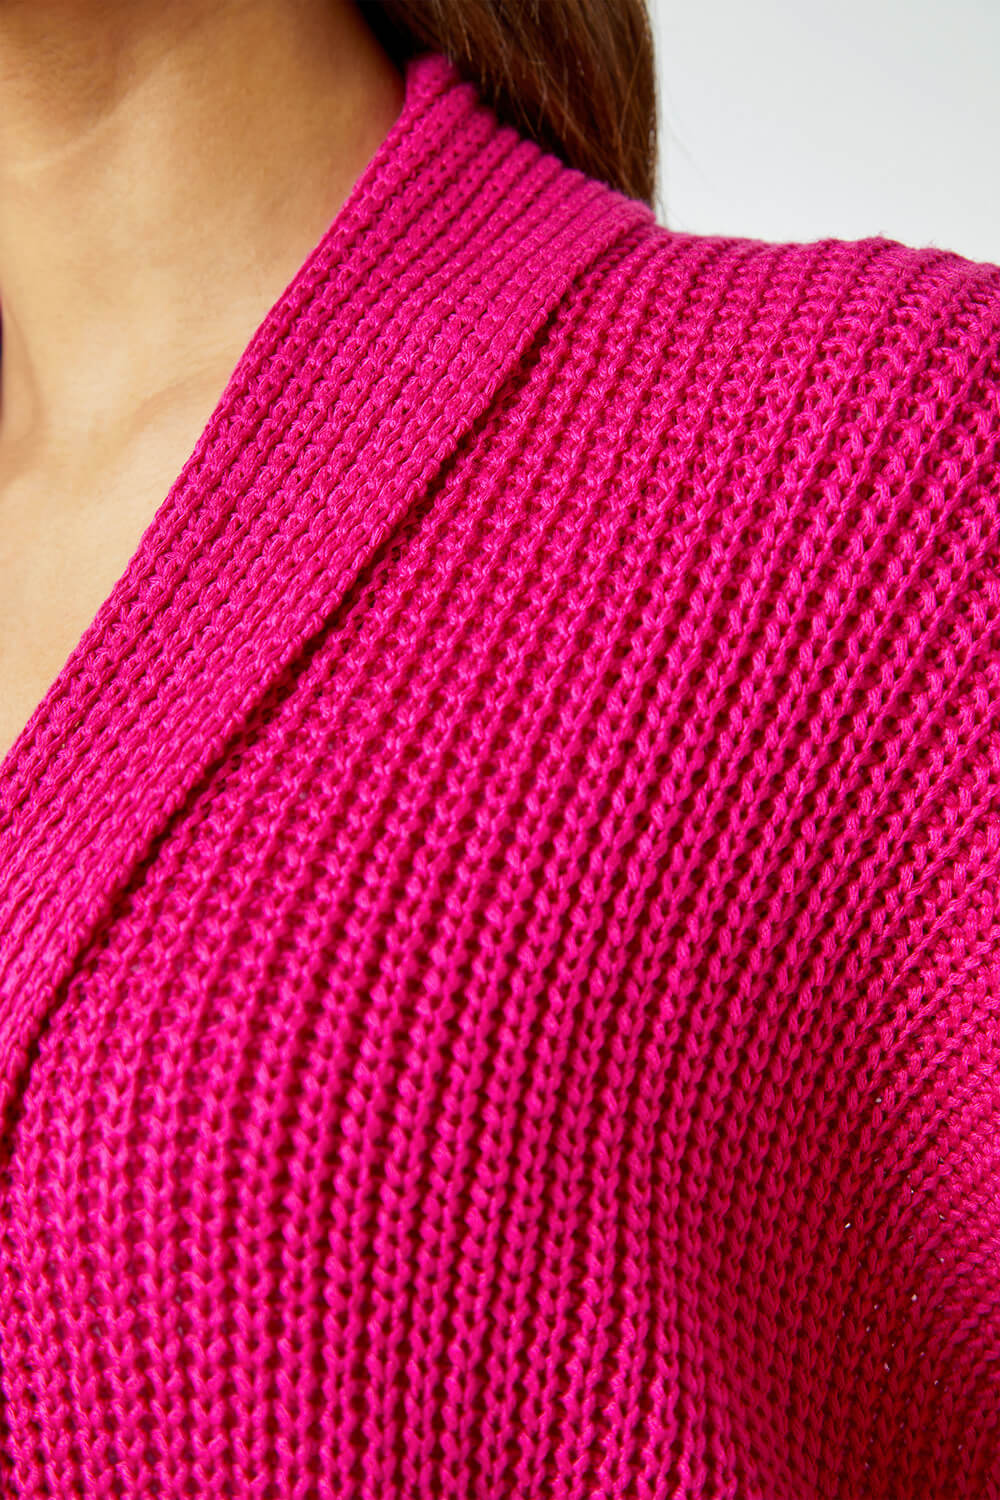 Fuchsia Relaxed Knitted Shrug, Image 5 of 5